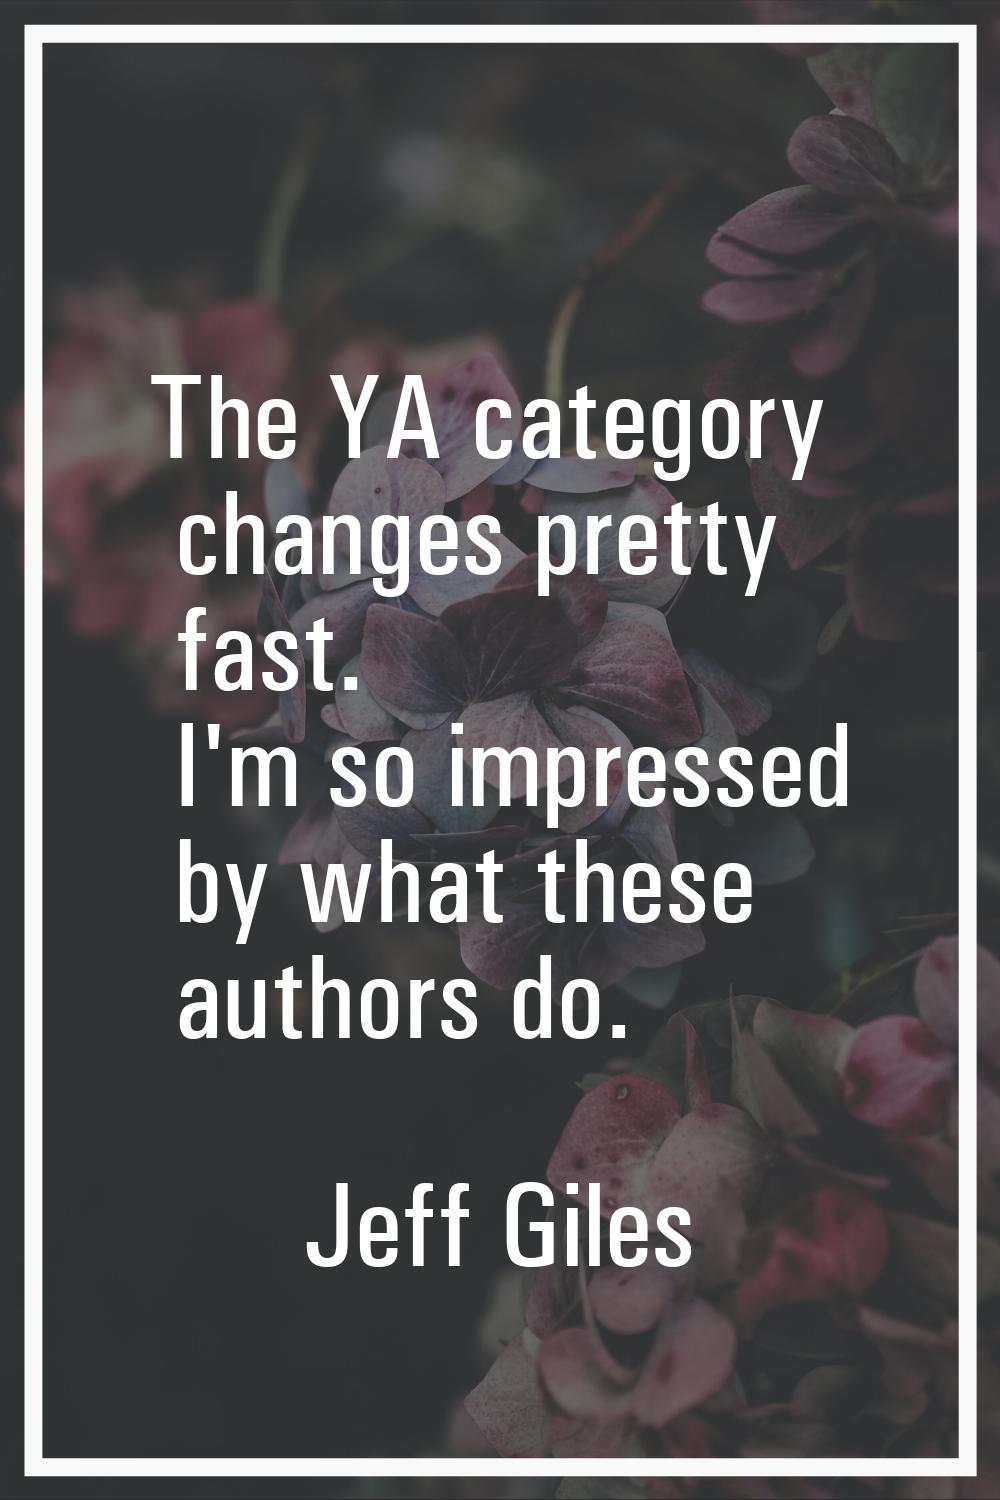 The YA category changes pretty fast. I'm so impressed by what these authors do.